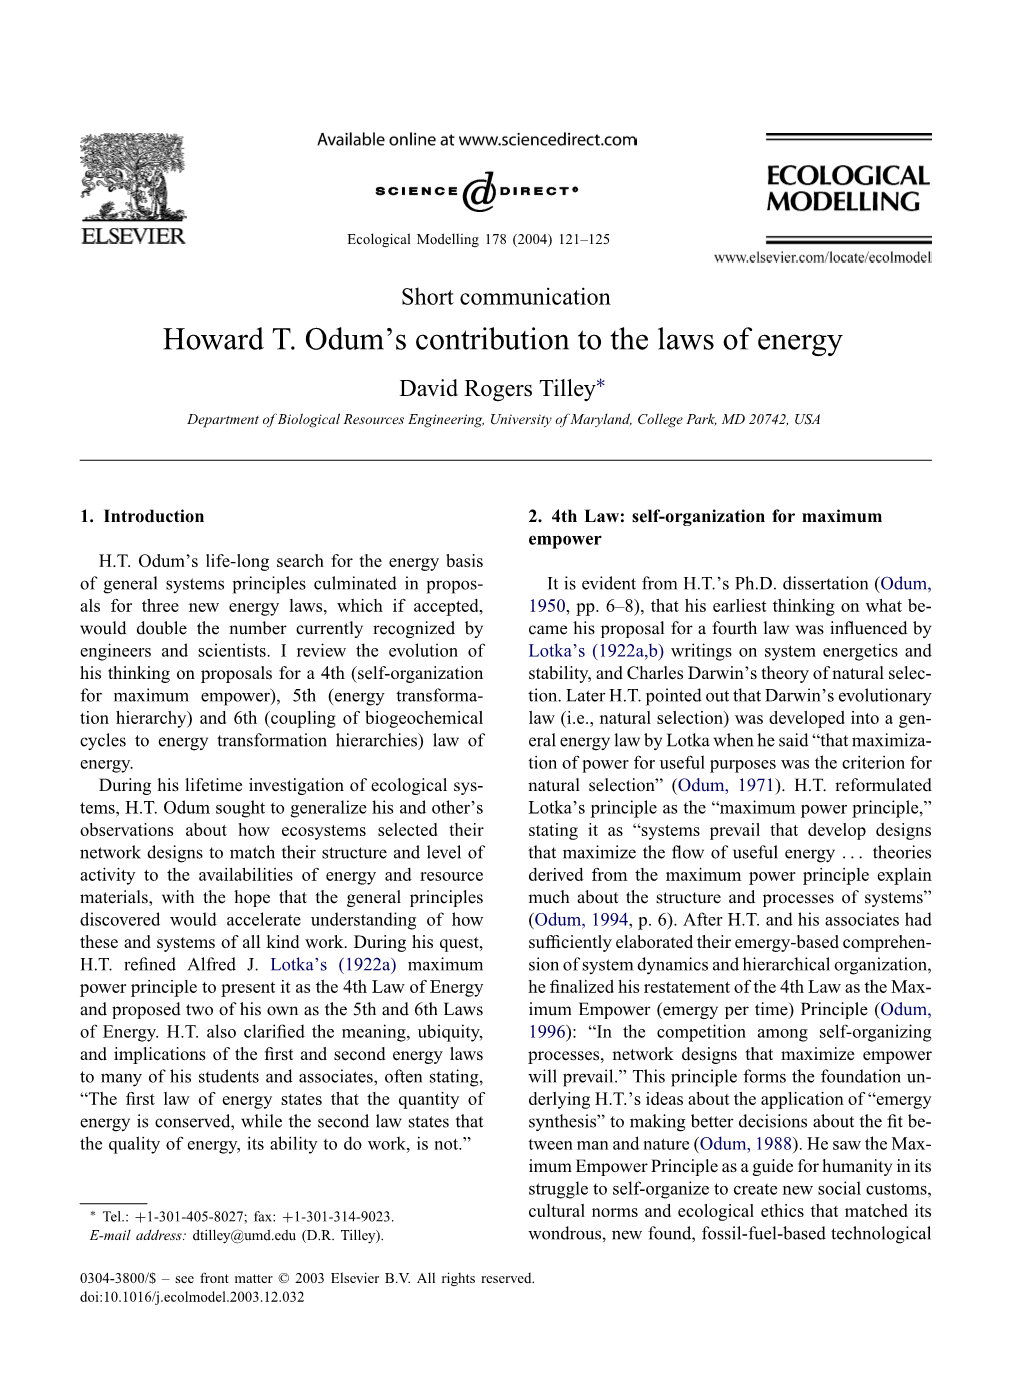 Howard T. Odum's Contribution to the Laws of Energy